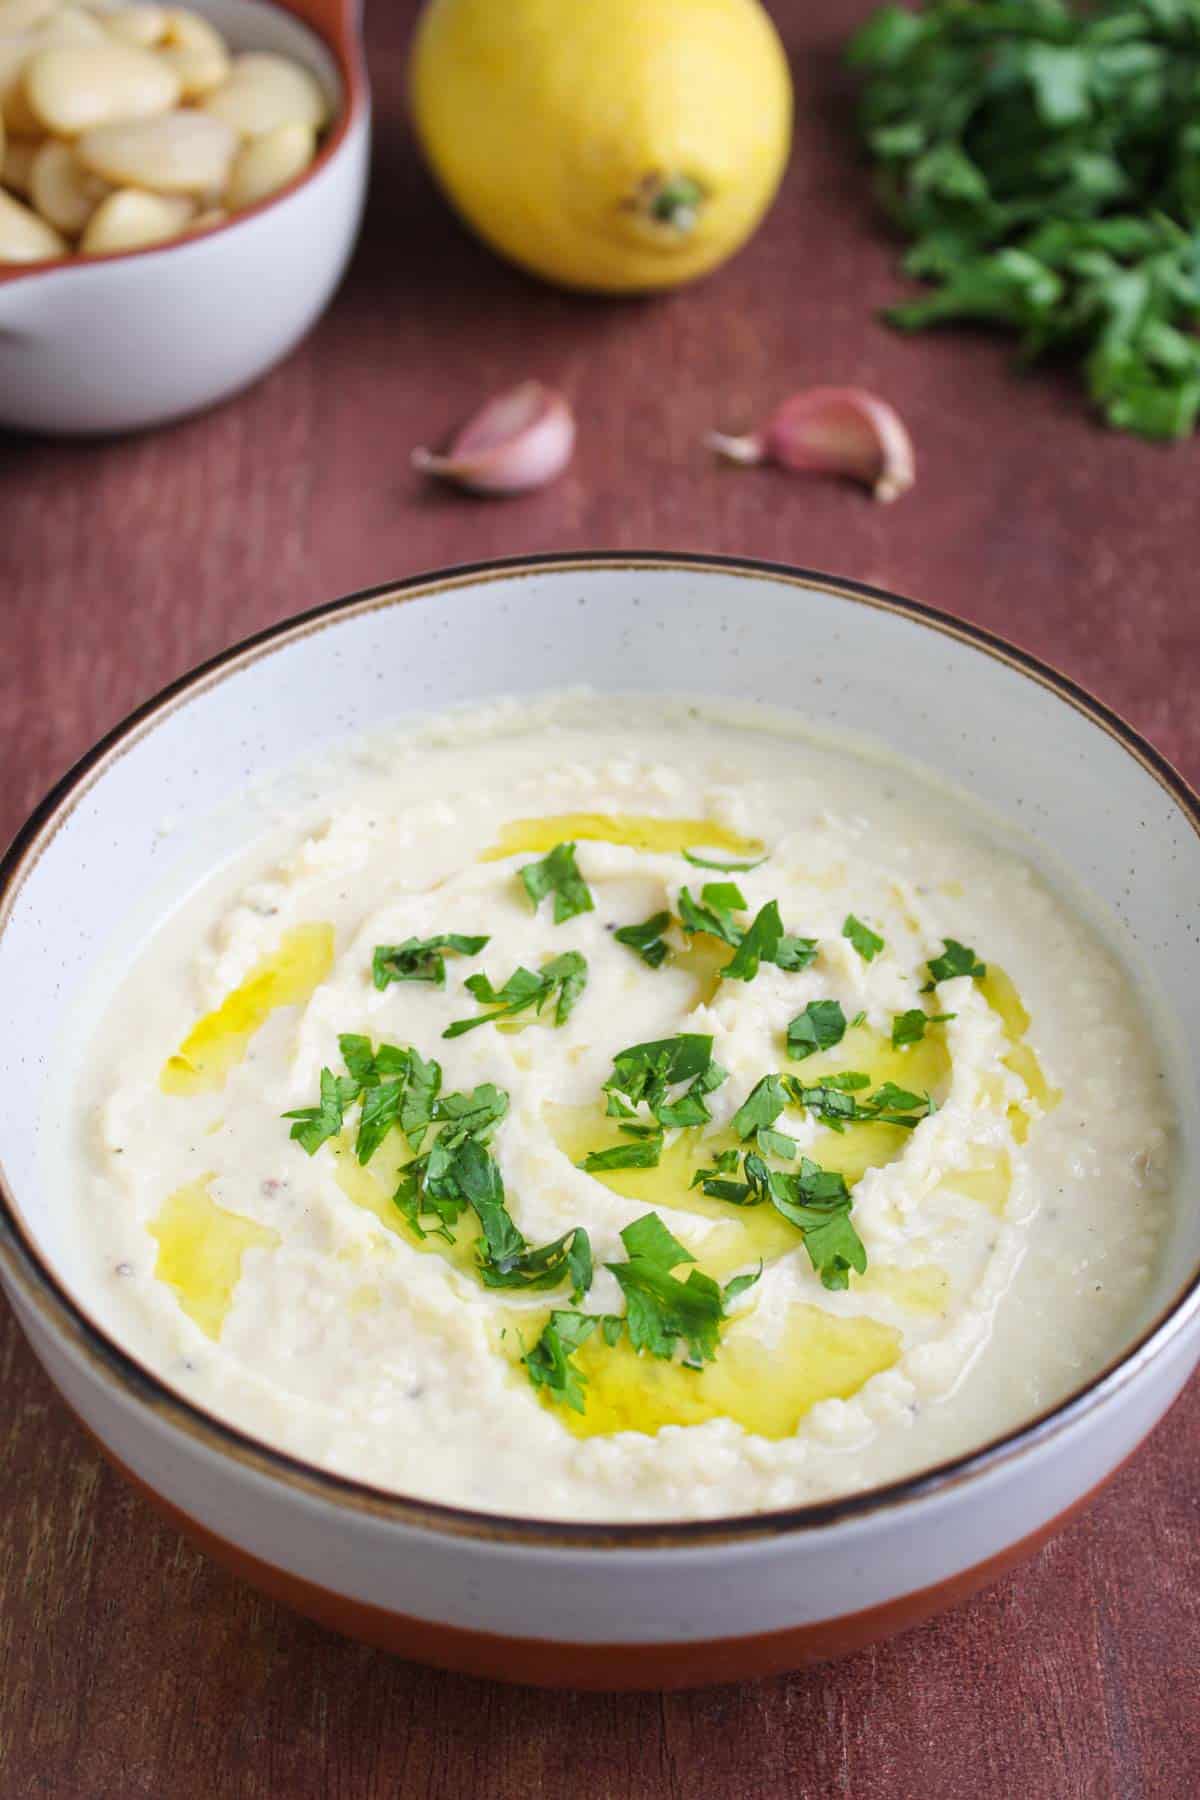 Butter Bean Dip with Lemon, Garlic, Olive Oil, and Parsley